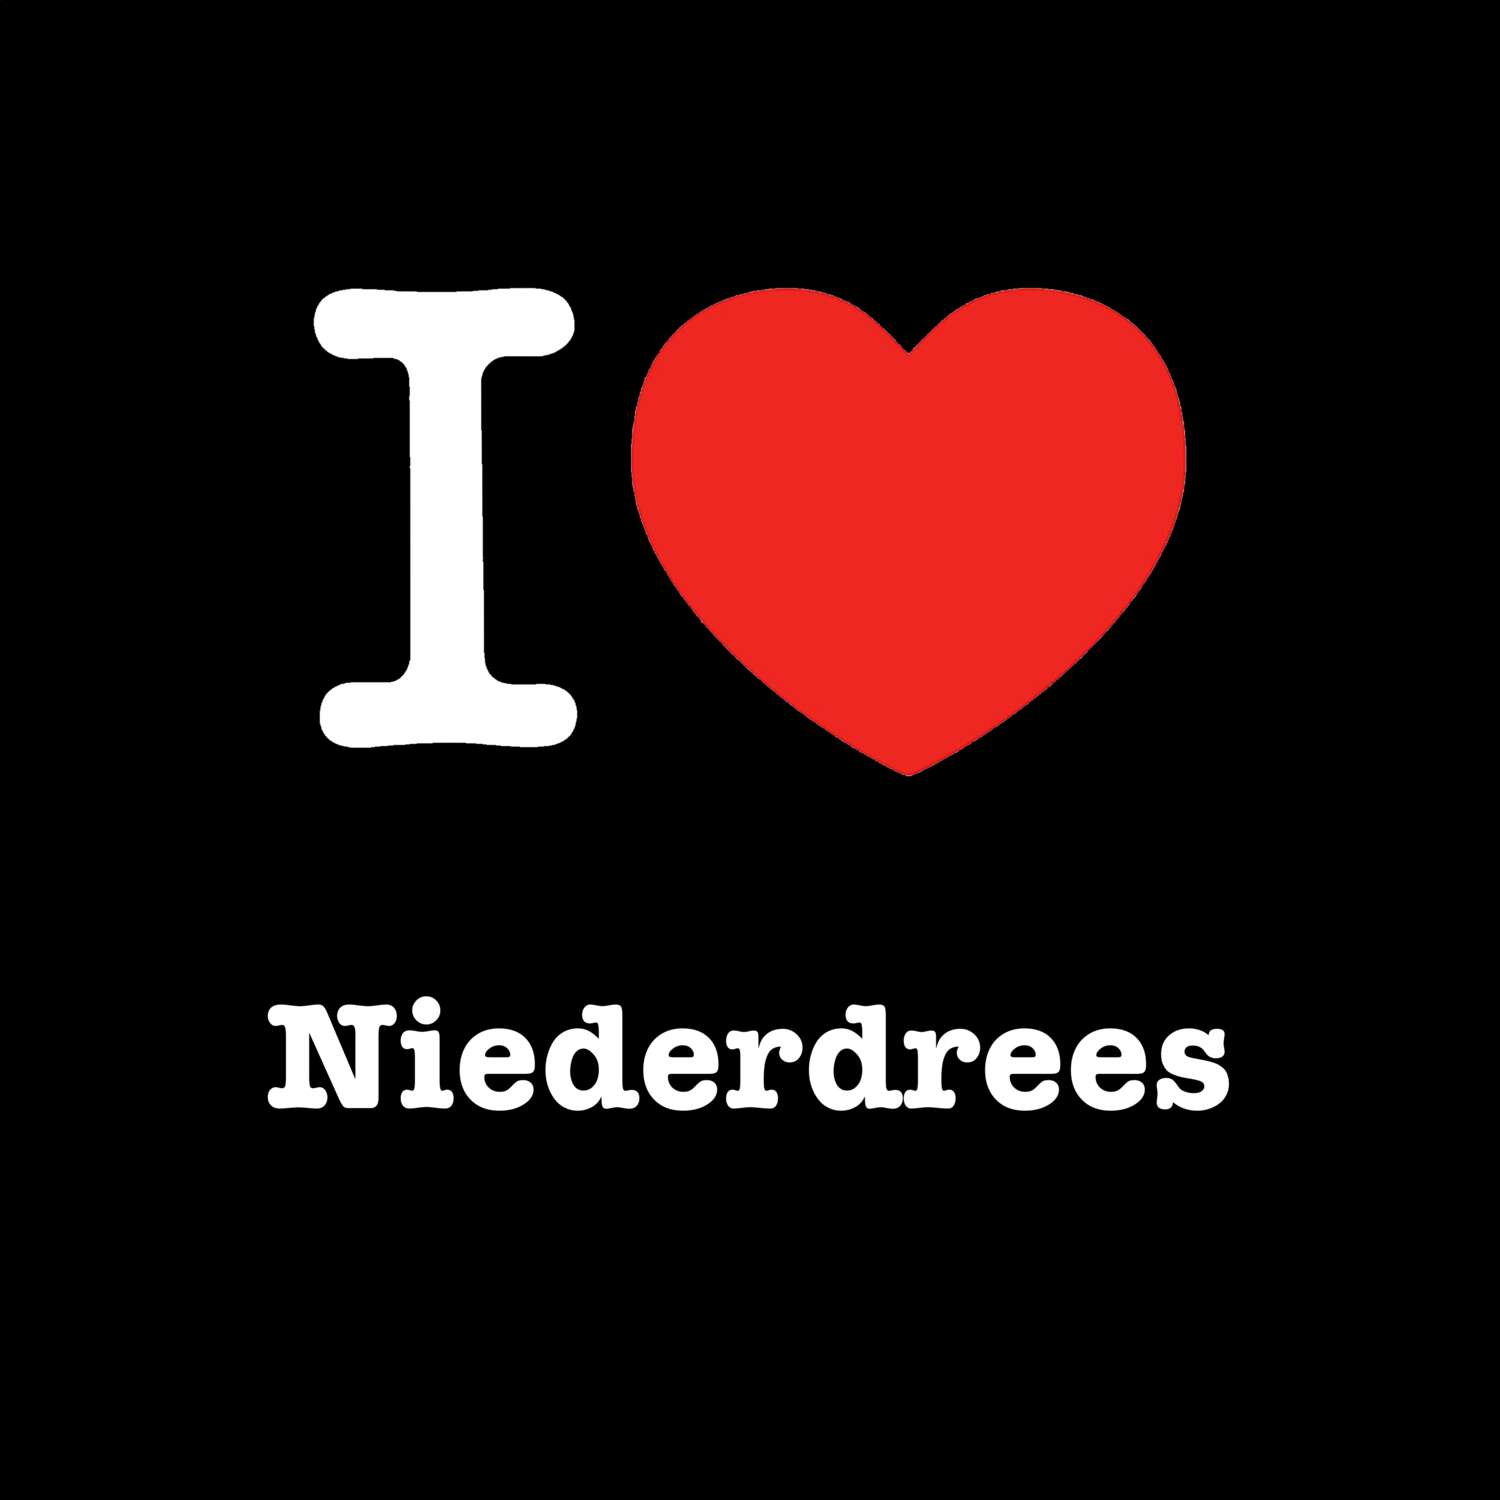 Niederdrees T-Shirt »I love«